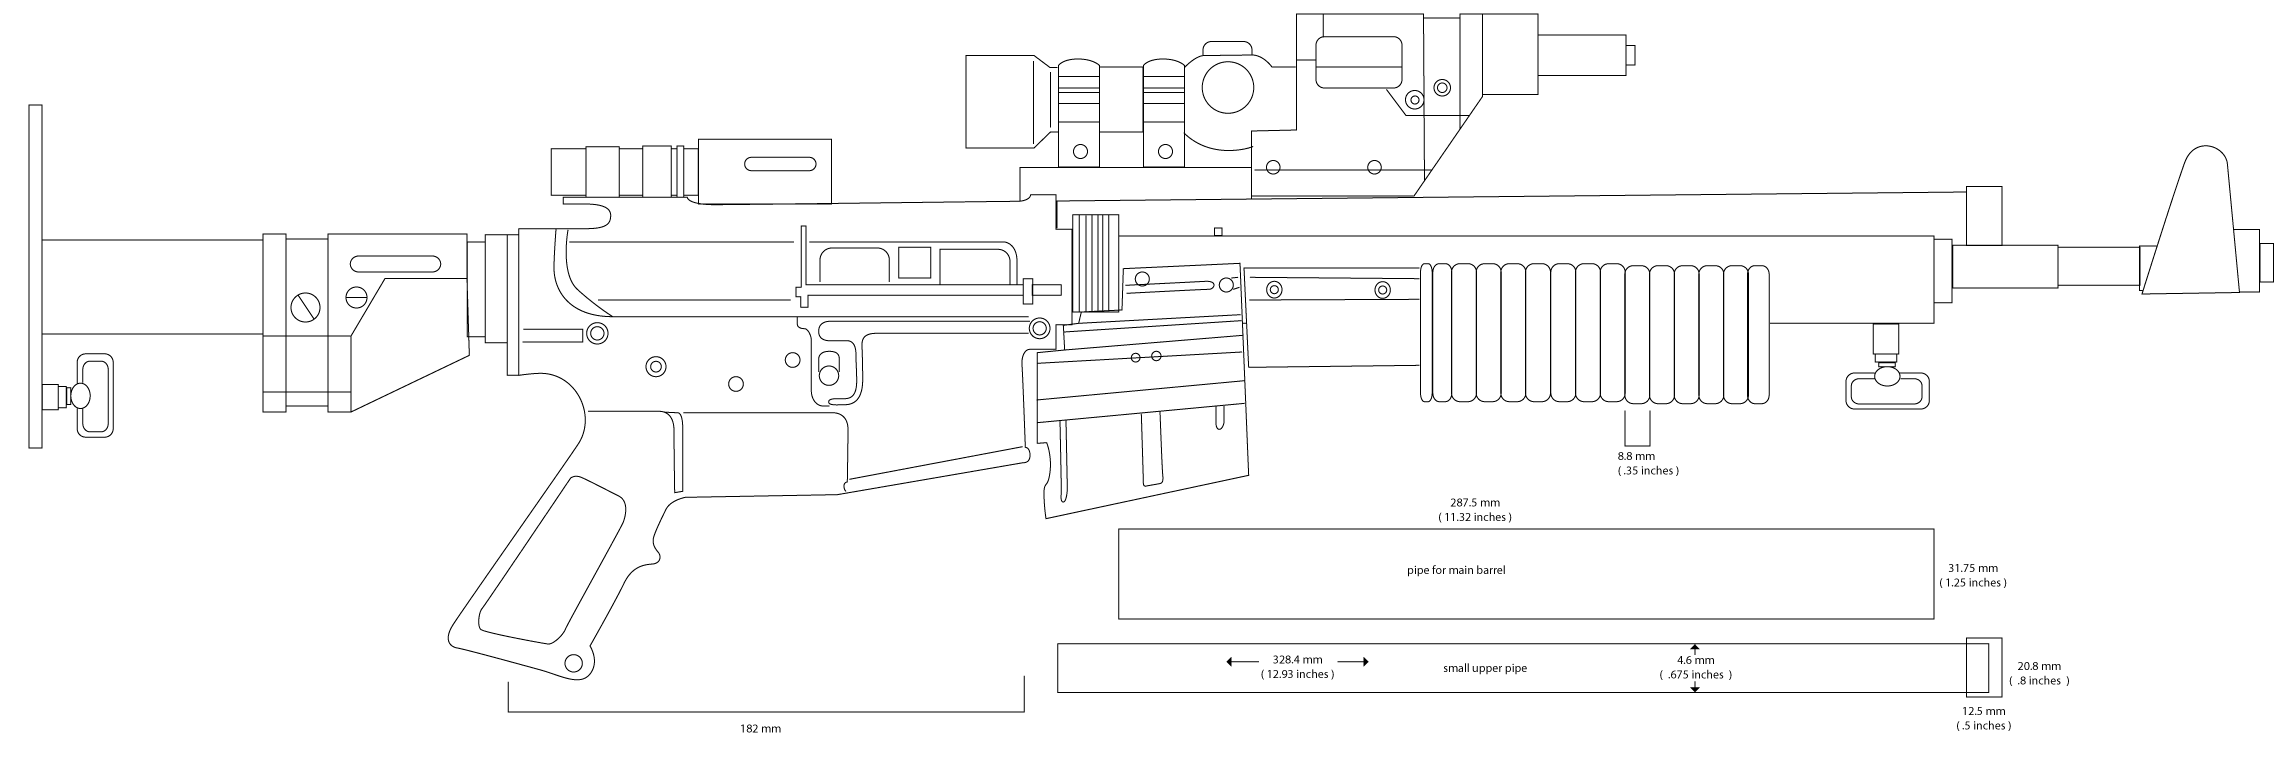 click here for the blueprints to this rifle